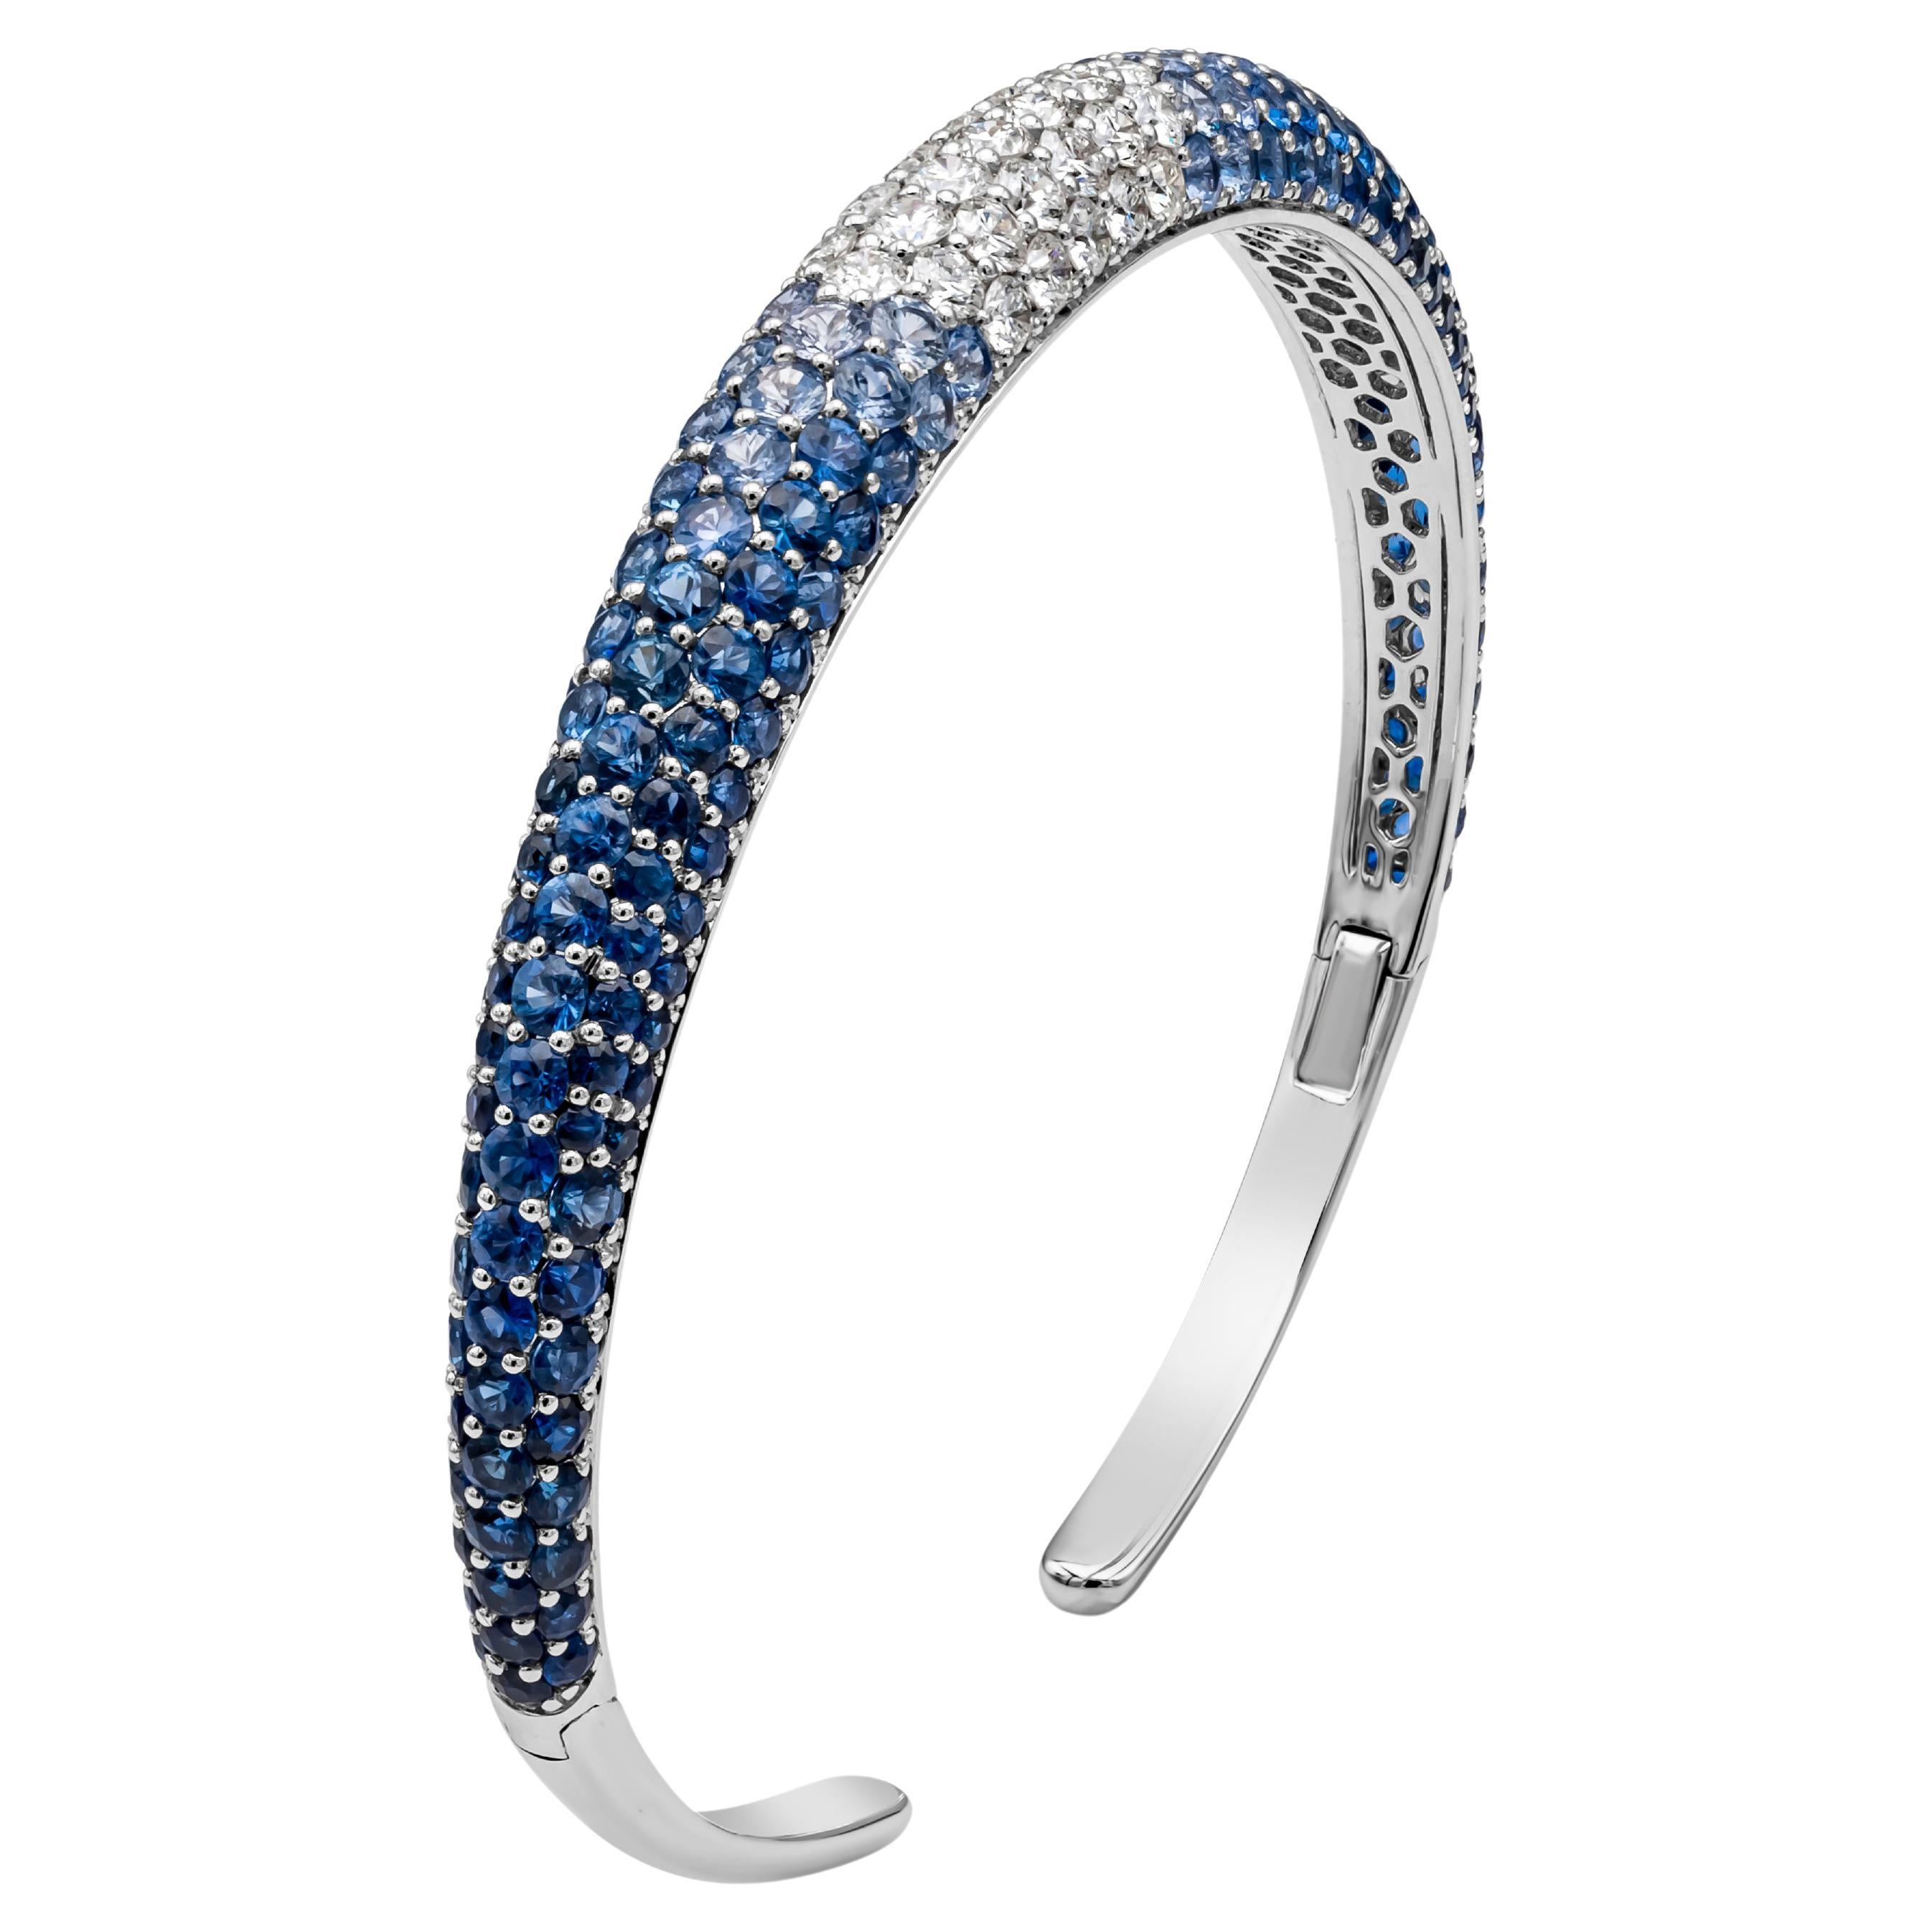 This fashionable and beautiful bangle bracelet showcases a 10.05 carats total brilliant round cut color-rich blue sapphire and diamond, set in a micro-pave dome set in a shared prong setting. Diamonds are approximately F-G color, VS-SI in clarity.